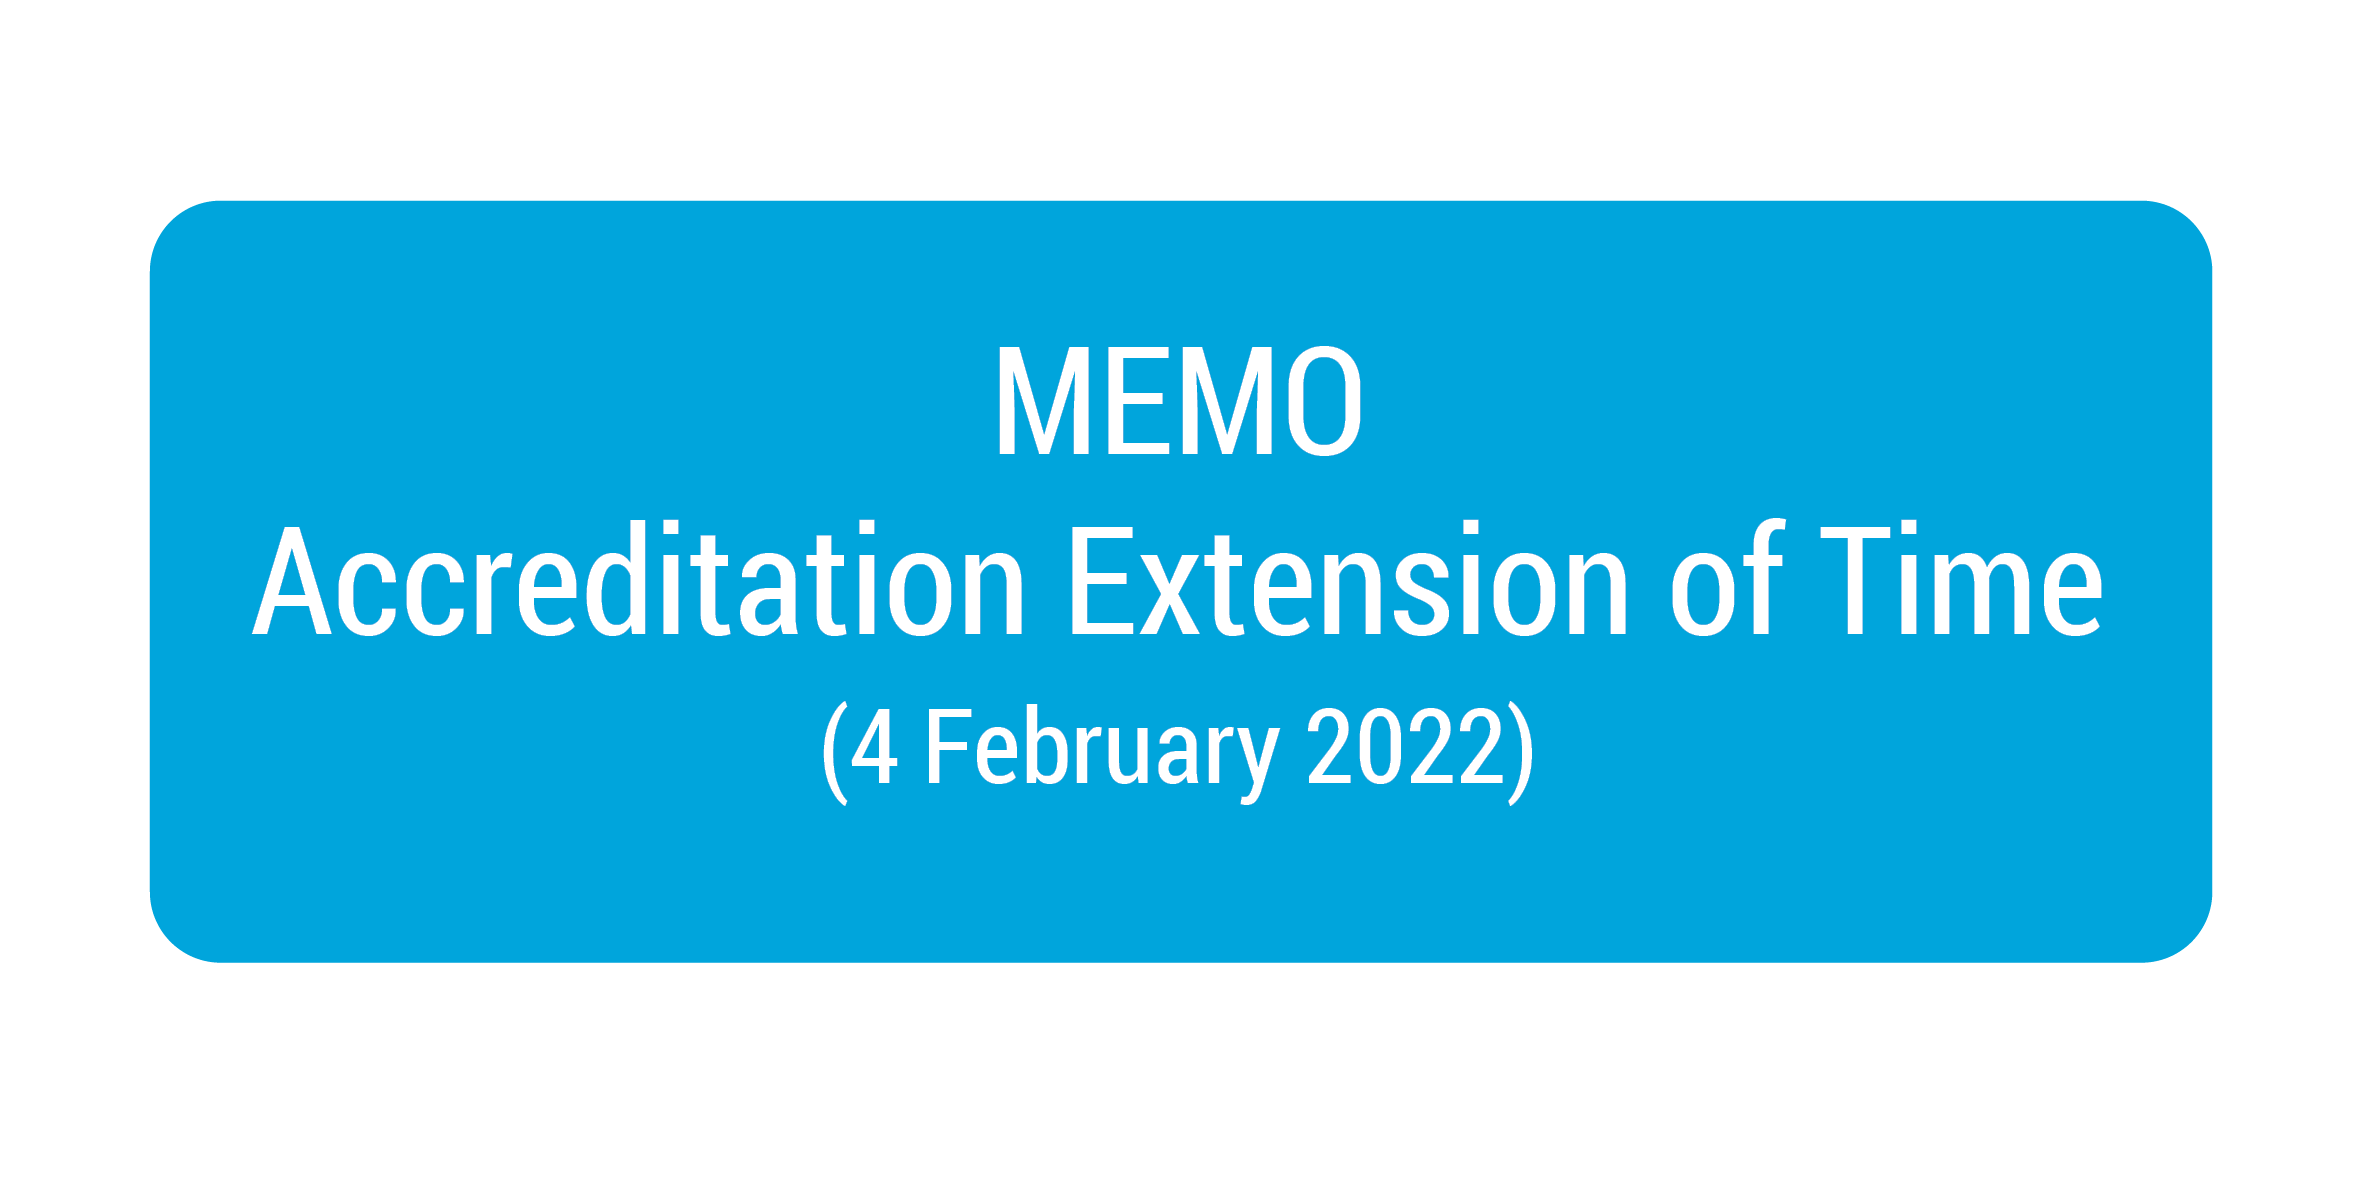 CES Ltd MEMO Accreditation Extension of Time 040222